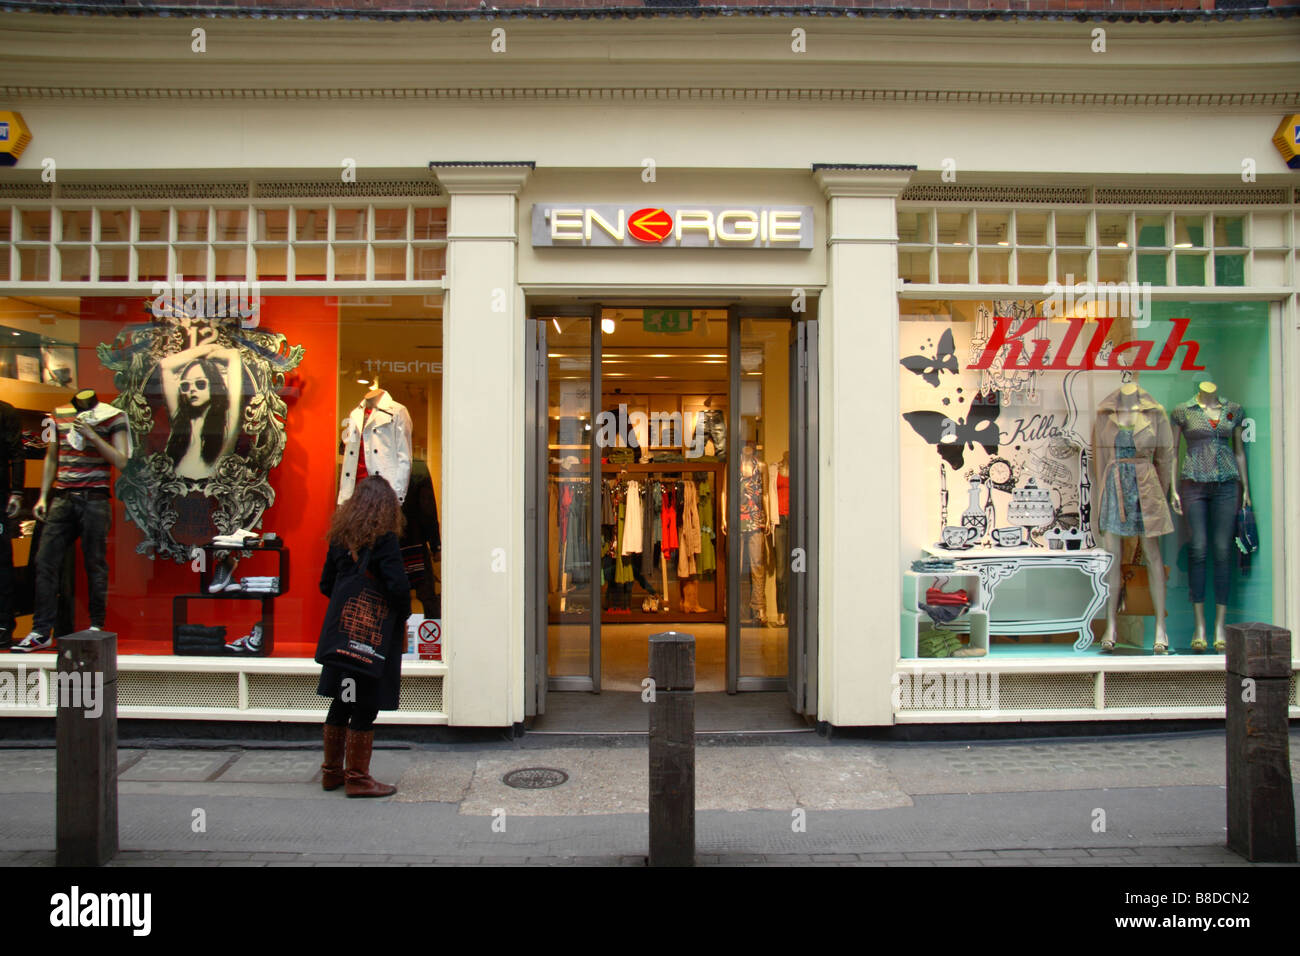 The shop front to the Energie men & women's clothing shop, Covent Garden, London. Jan 2009 Stock Photo